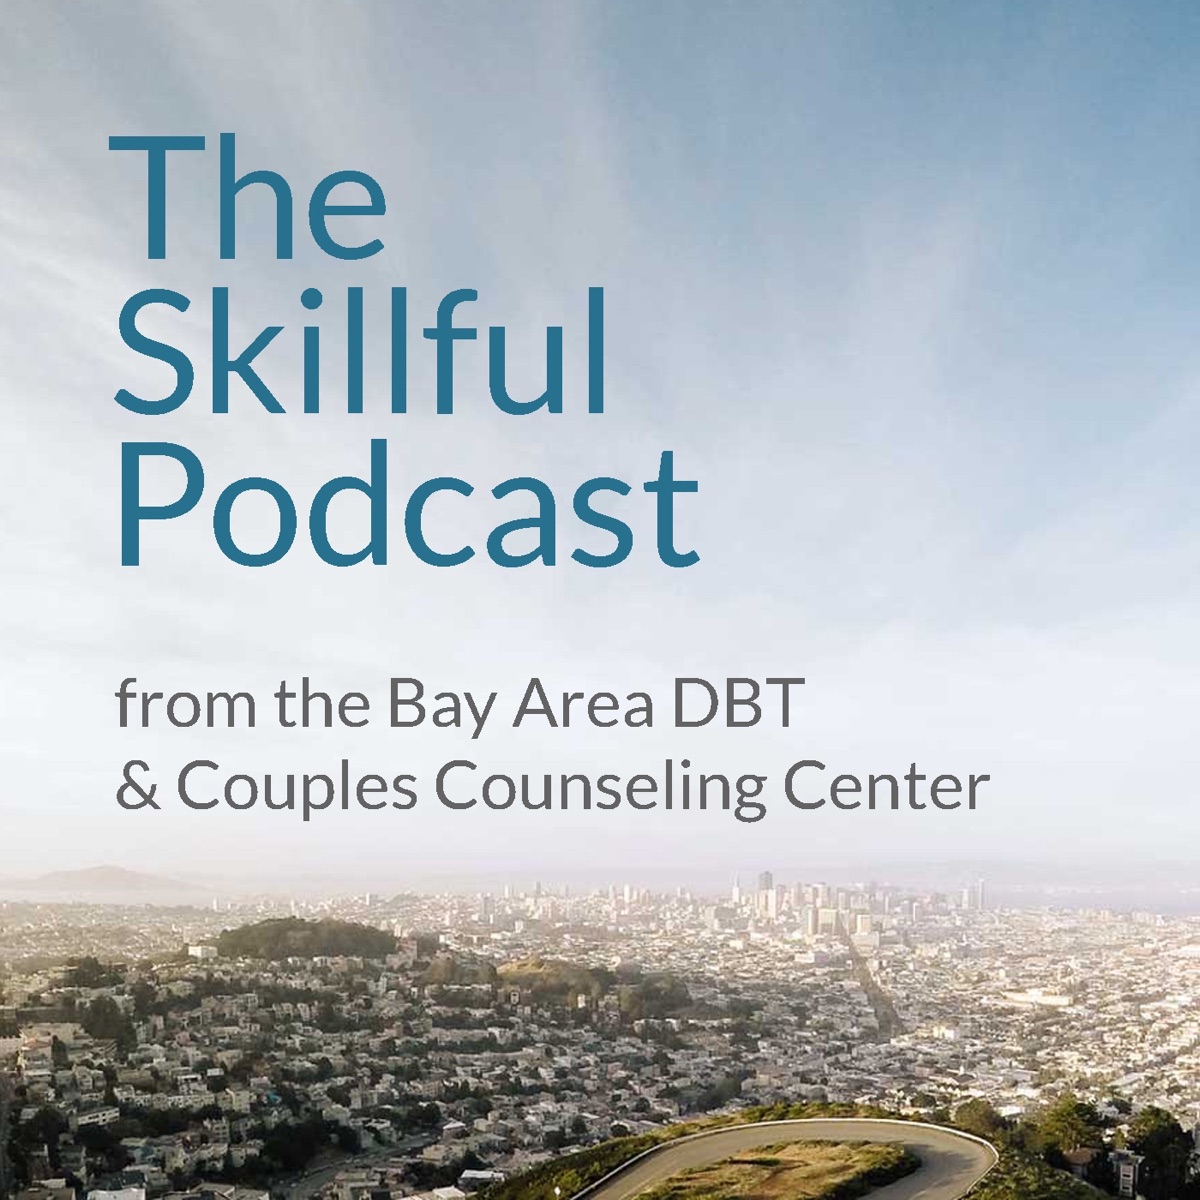 The Skillful Podcast